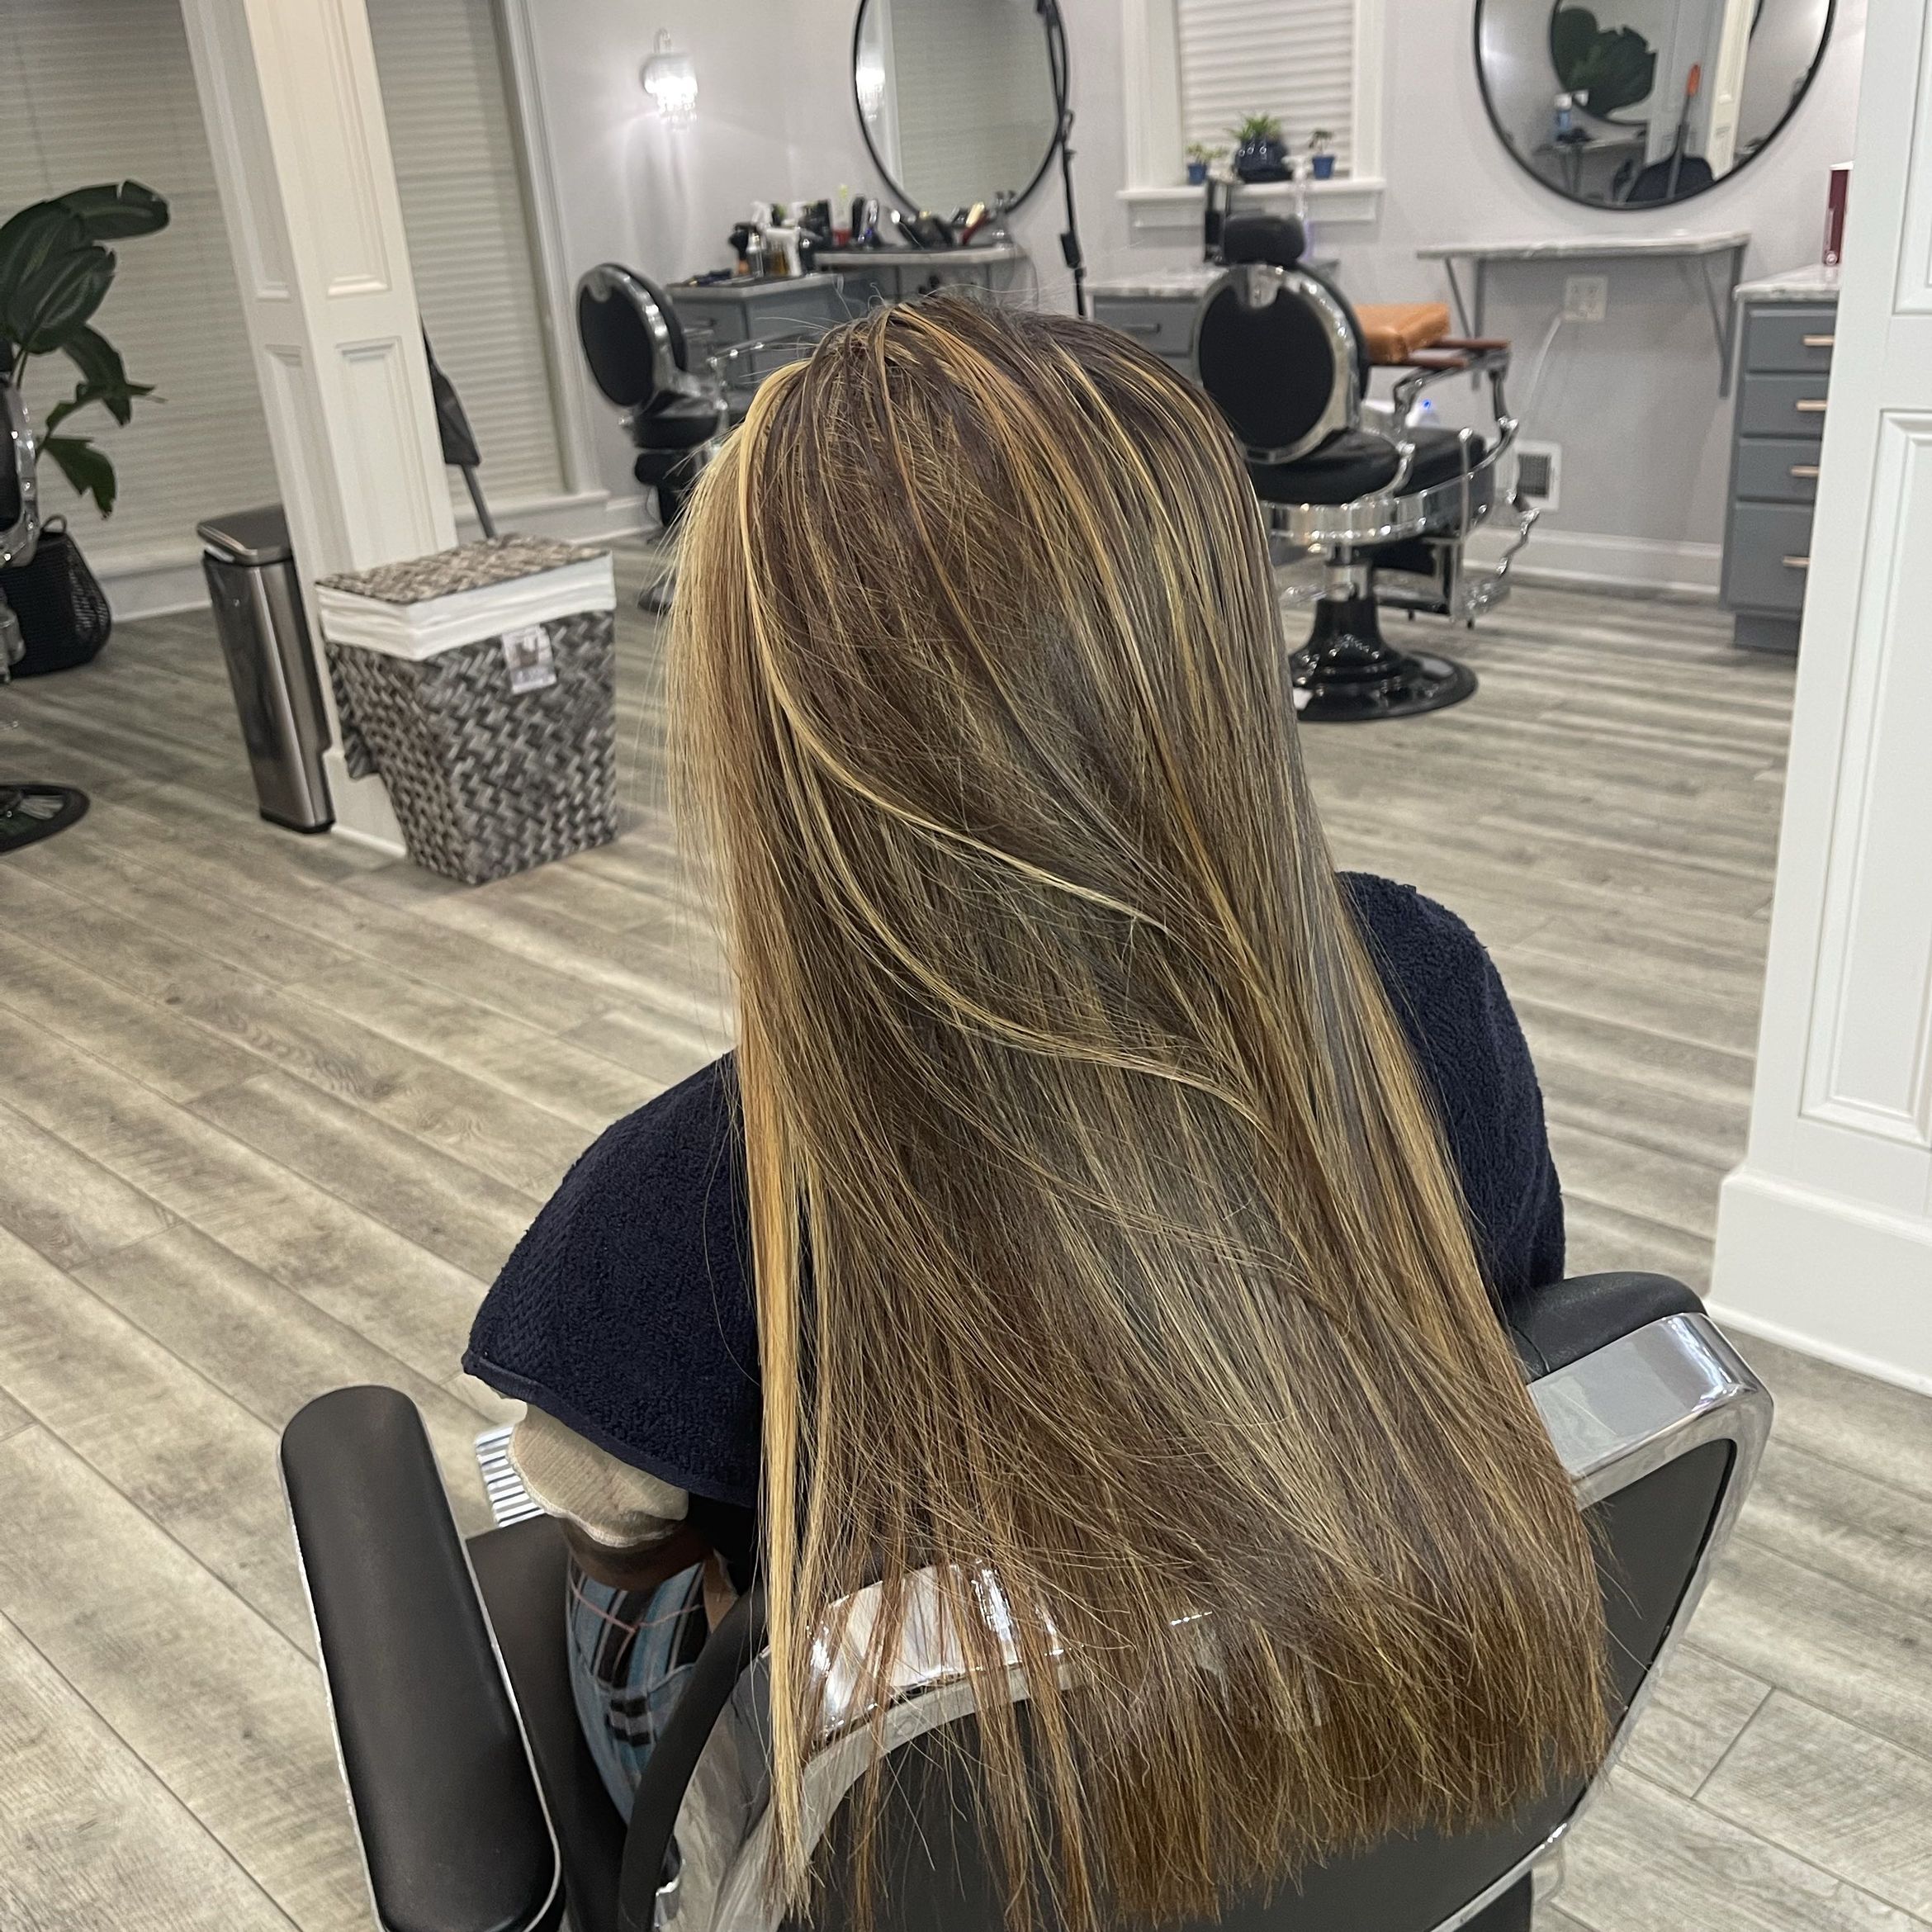 Direct blow dry, or wash and set portfolio